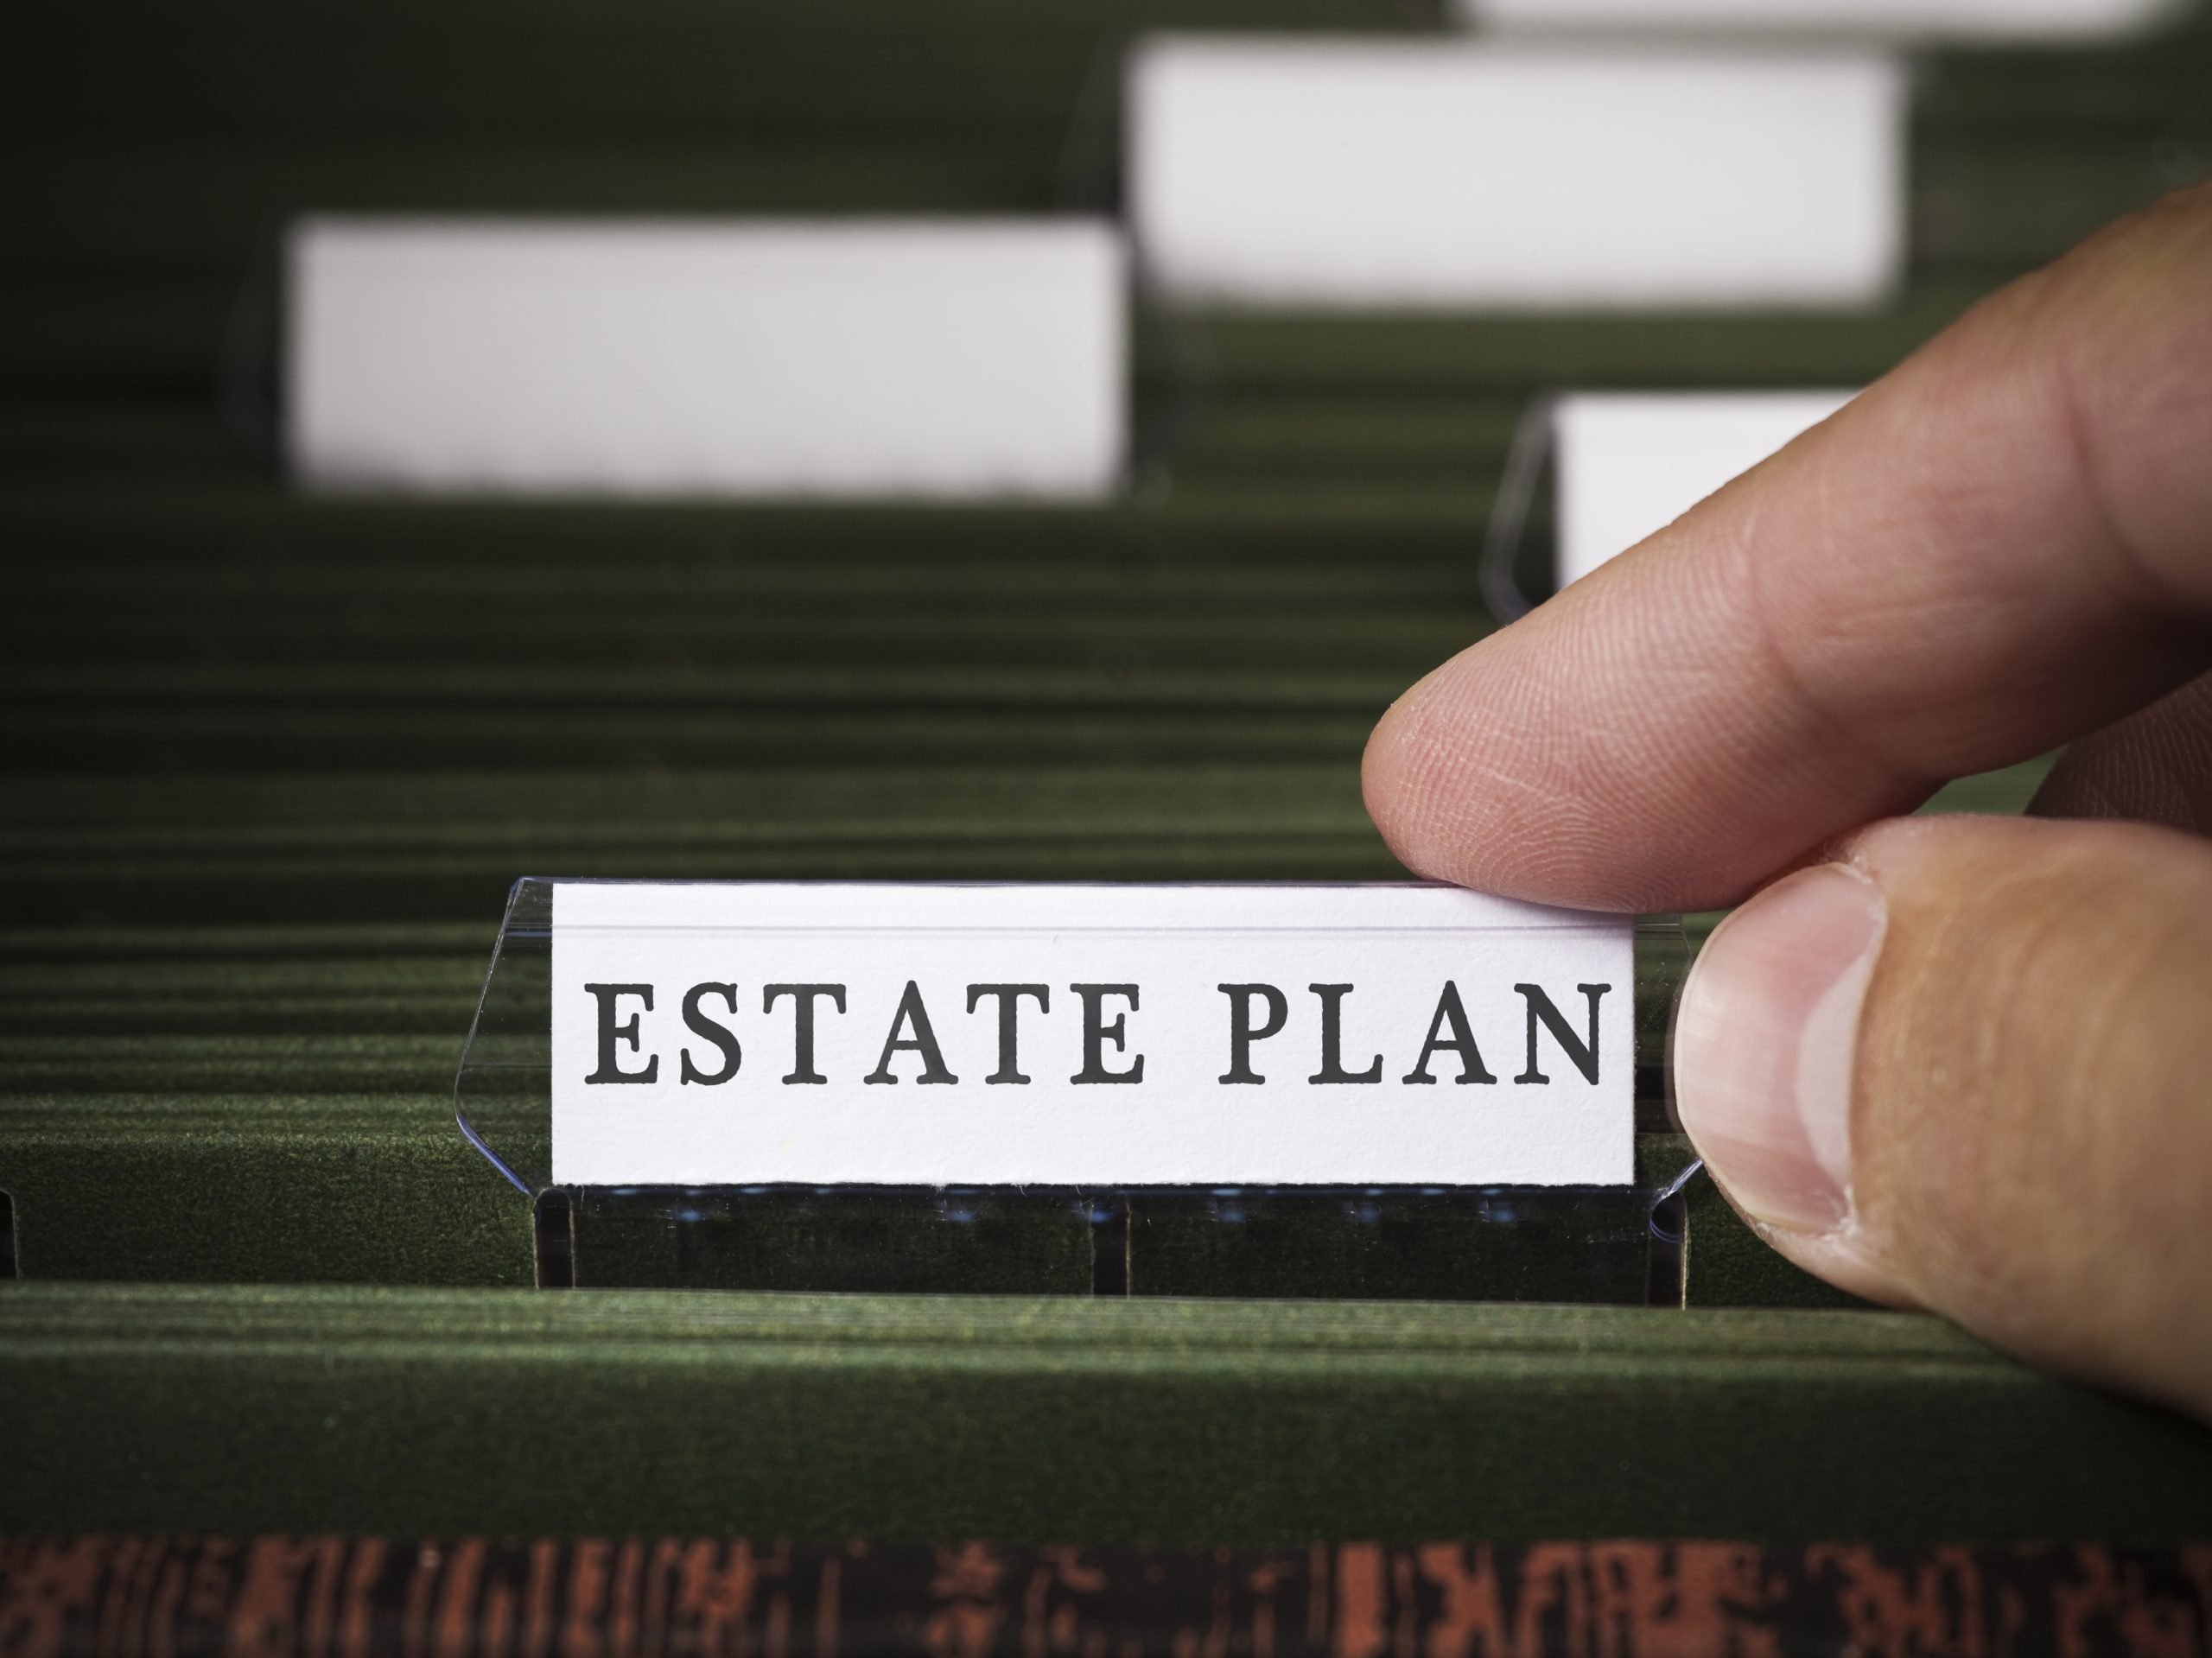 3 Quick Suggestions for Planning Your Estate